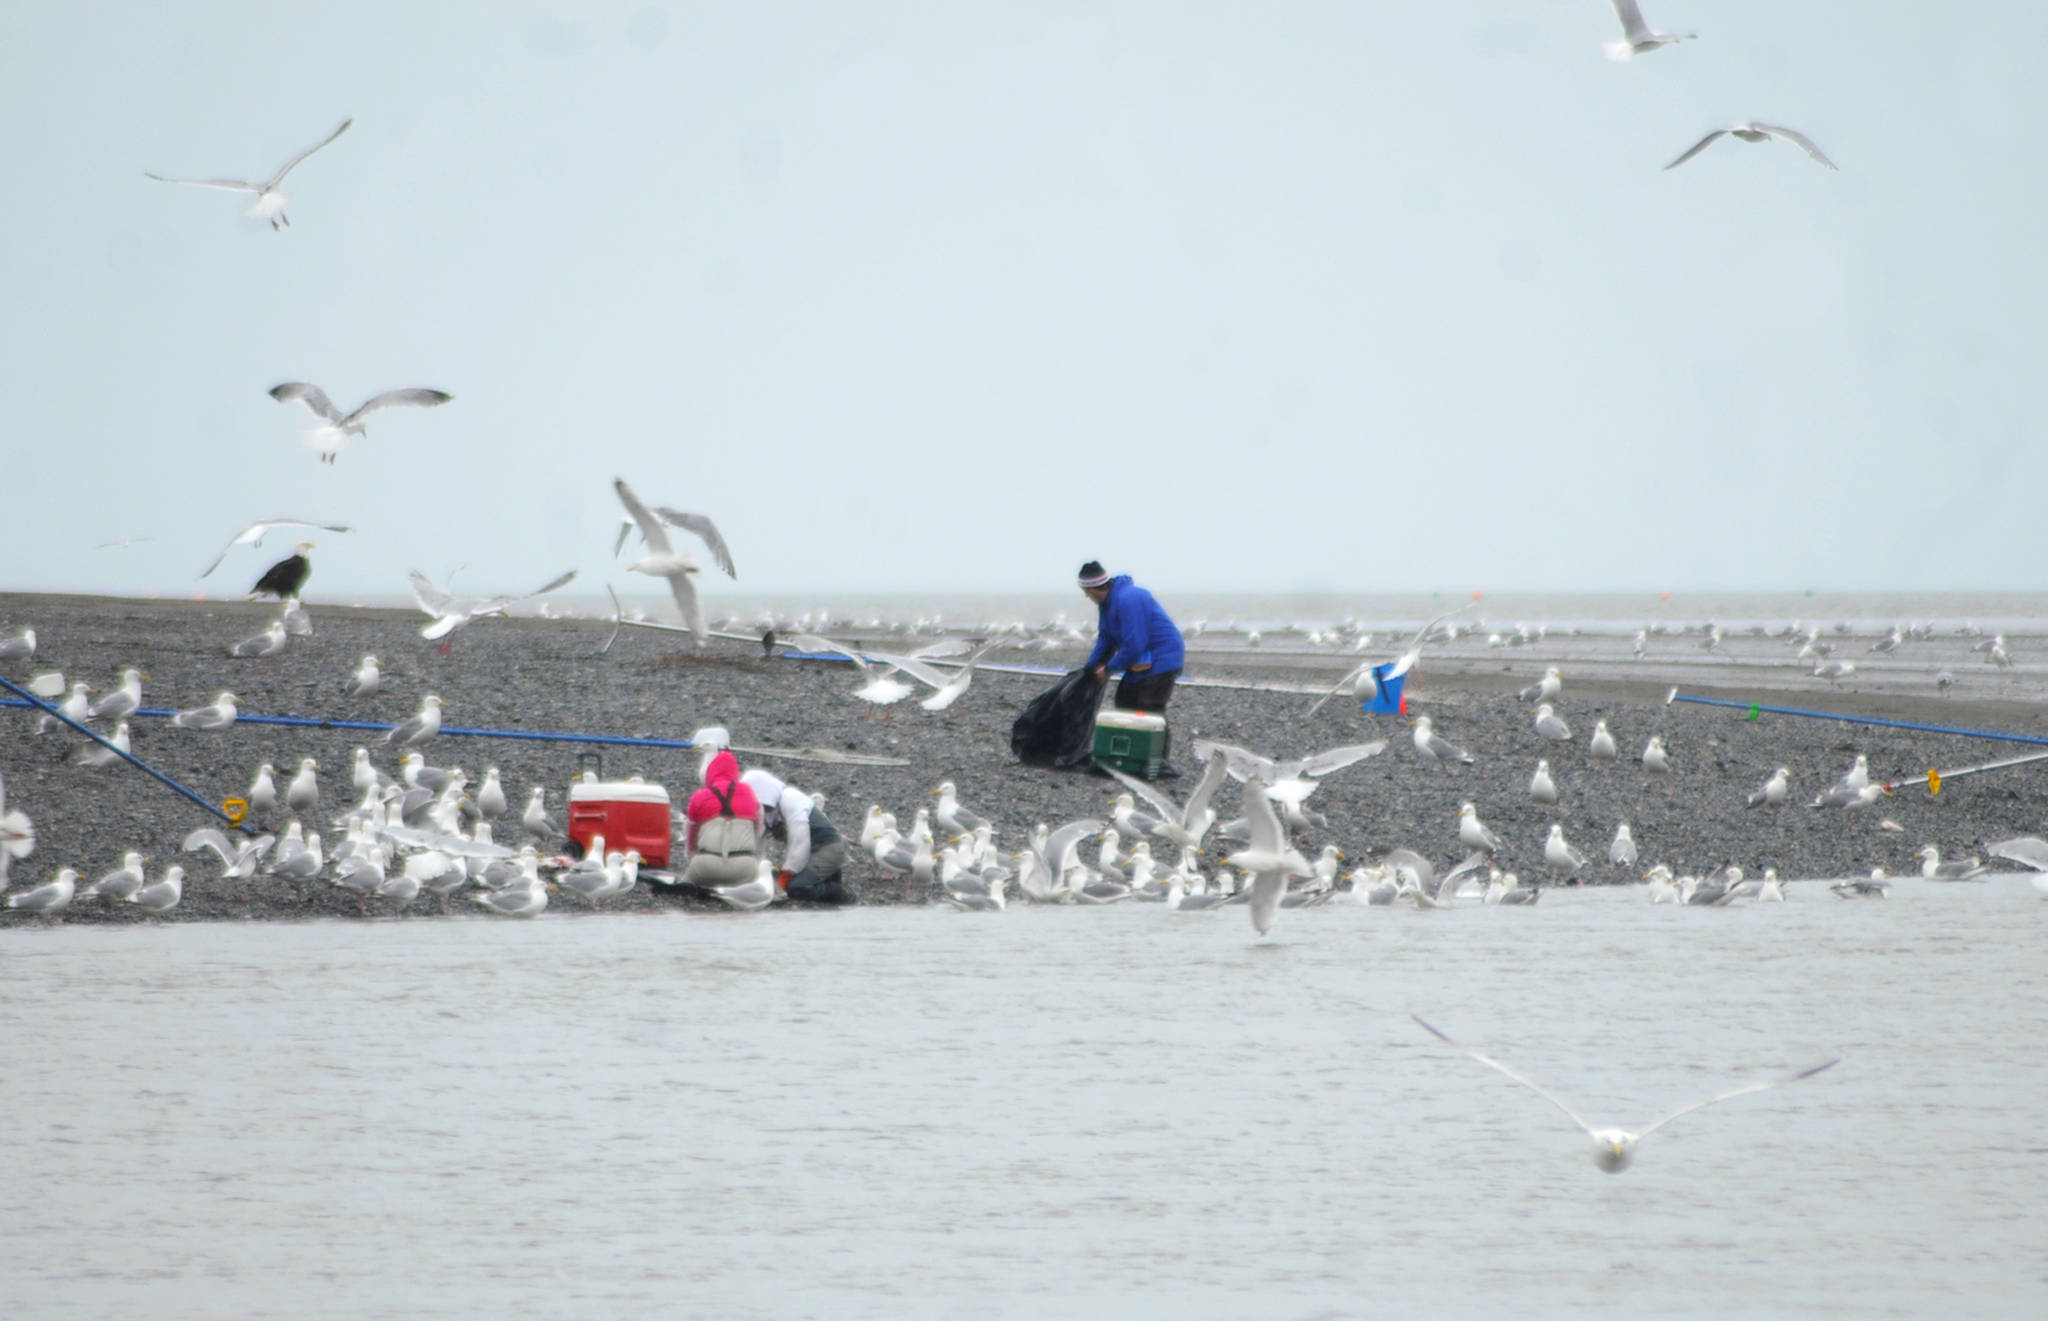 Gulls mill and call near where fishermen clean the sockeye salmon they caught dipnetting near the mouth of the Kasilof River on Wednesday, June 28, 2018 in Kasilof, Alaska. The personal-use dipnet fishery on the Kasilof River opened Monday, with fish counts significantly behind last year and behind the 10-year average for the same date. Some fishermen were successful Wednesday, though, both from shore and from boats. (Photo by Elizabeth Earl/Peninsula Clarion)